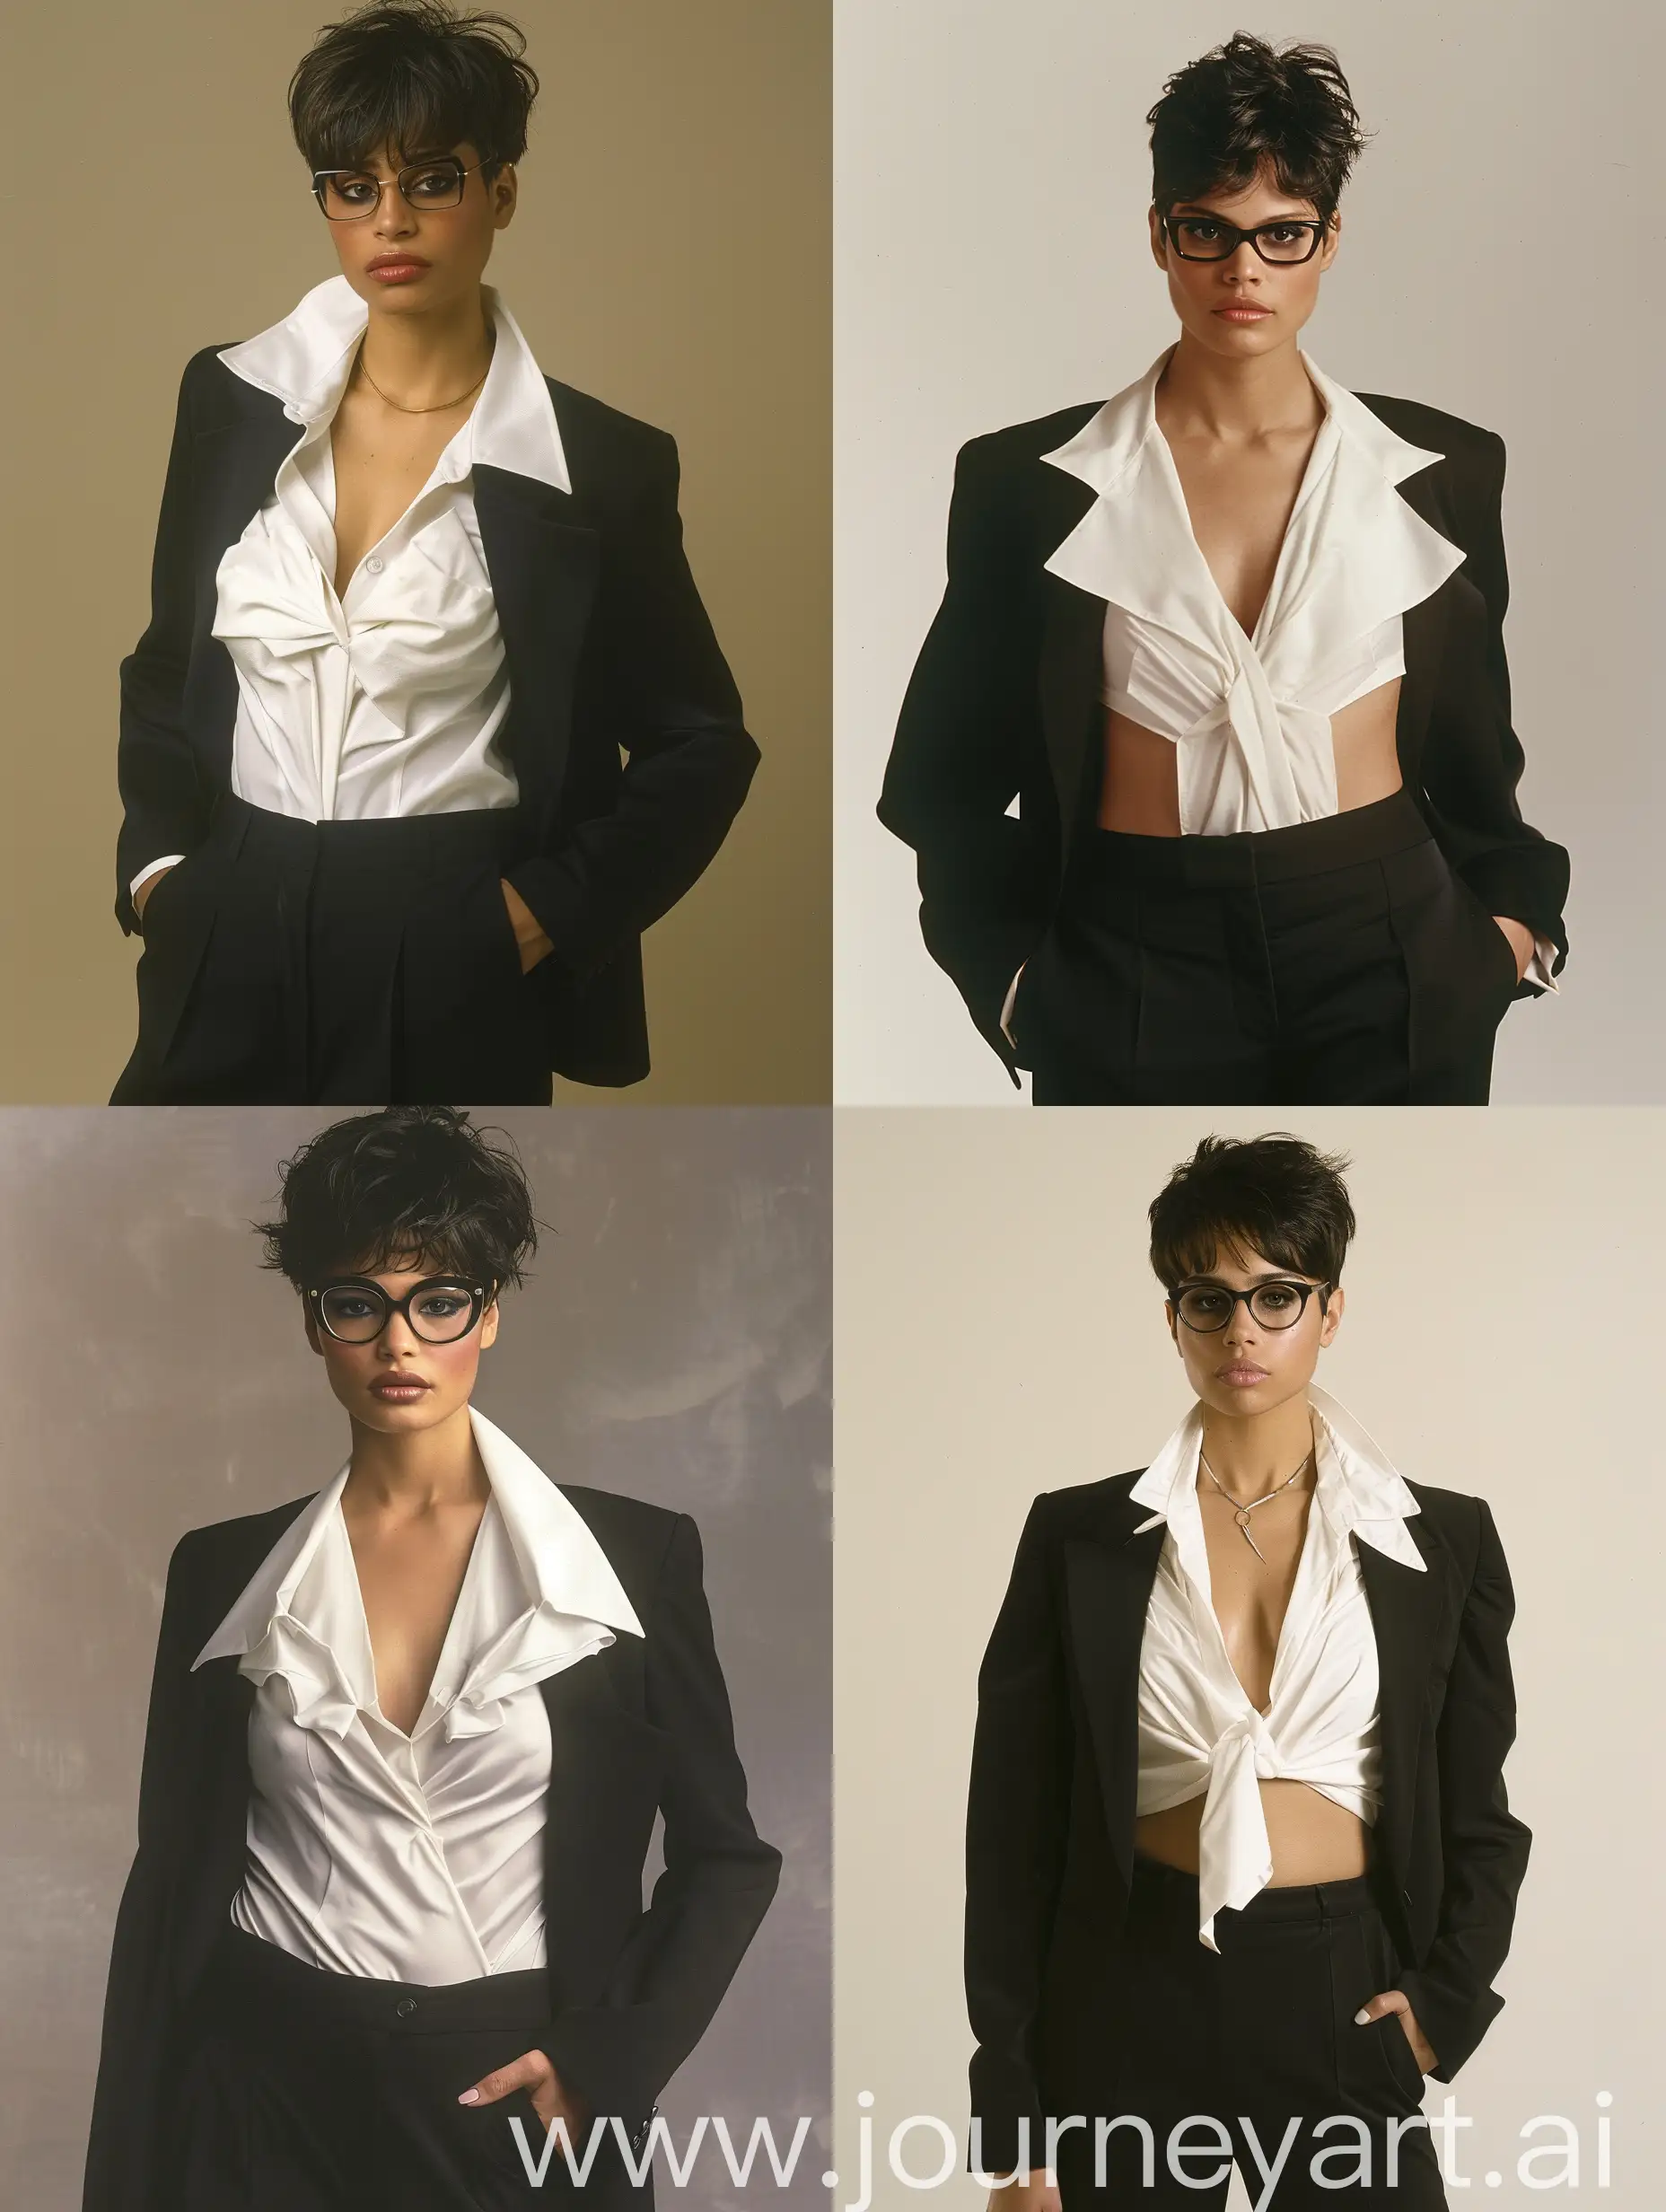 Woman, 30 Years Old, Latina, Mexican, Femininity, Athletic Body Type, Heavy Tan, Dark Hair, Short Pixie Hairstyle, Makeup, Glasses, Formal Black Pant Suit, Formal White Blouse, Cleavage, Collarbone, Large Folded Collar, 2000’s Fashion, 2005, Retro, Office, Work Atmosphere, Photography, Realism